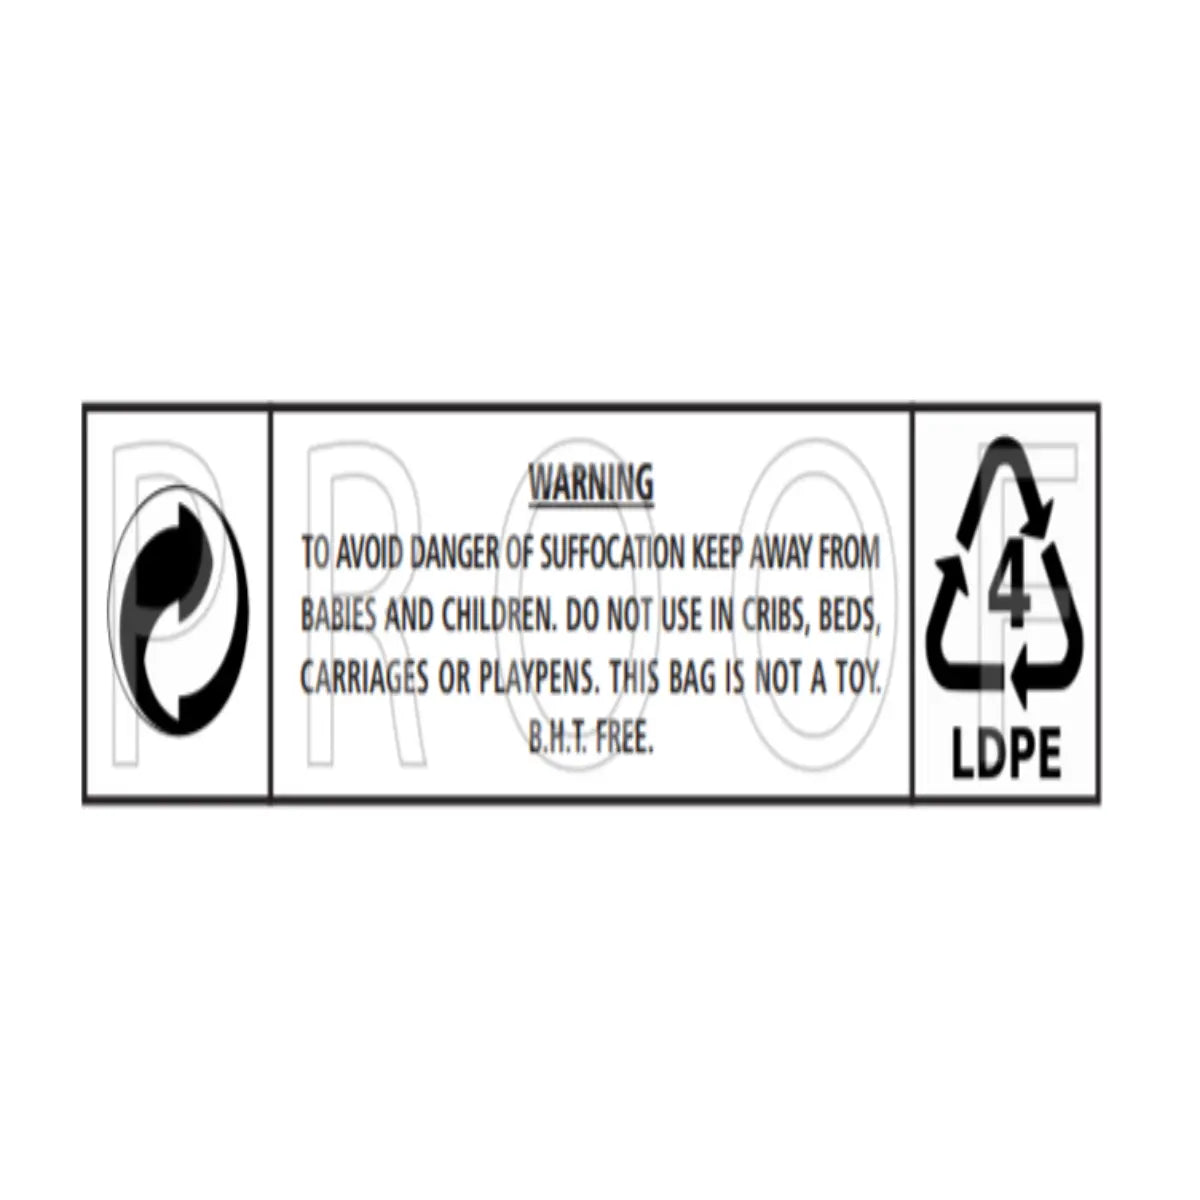 Garment Cover Bags On A Roll - Printed Warning Pins & Needles